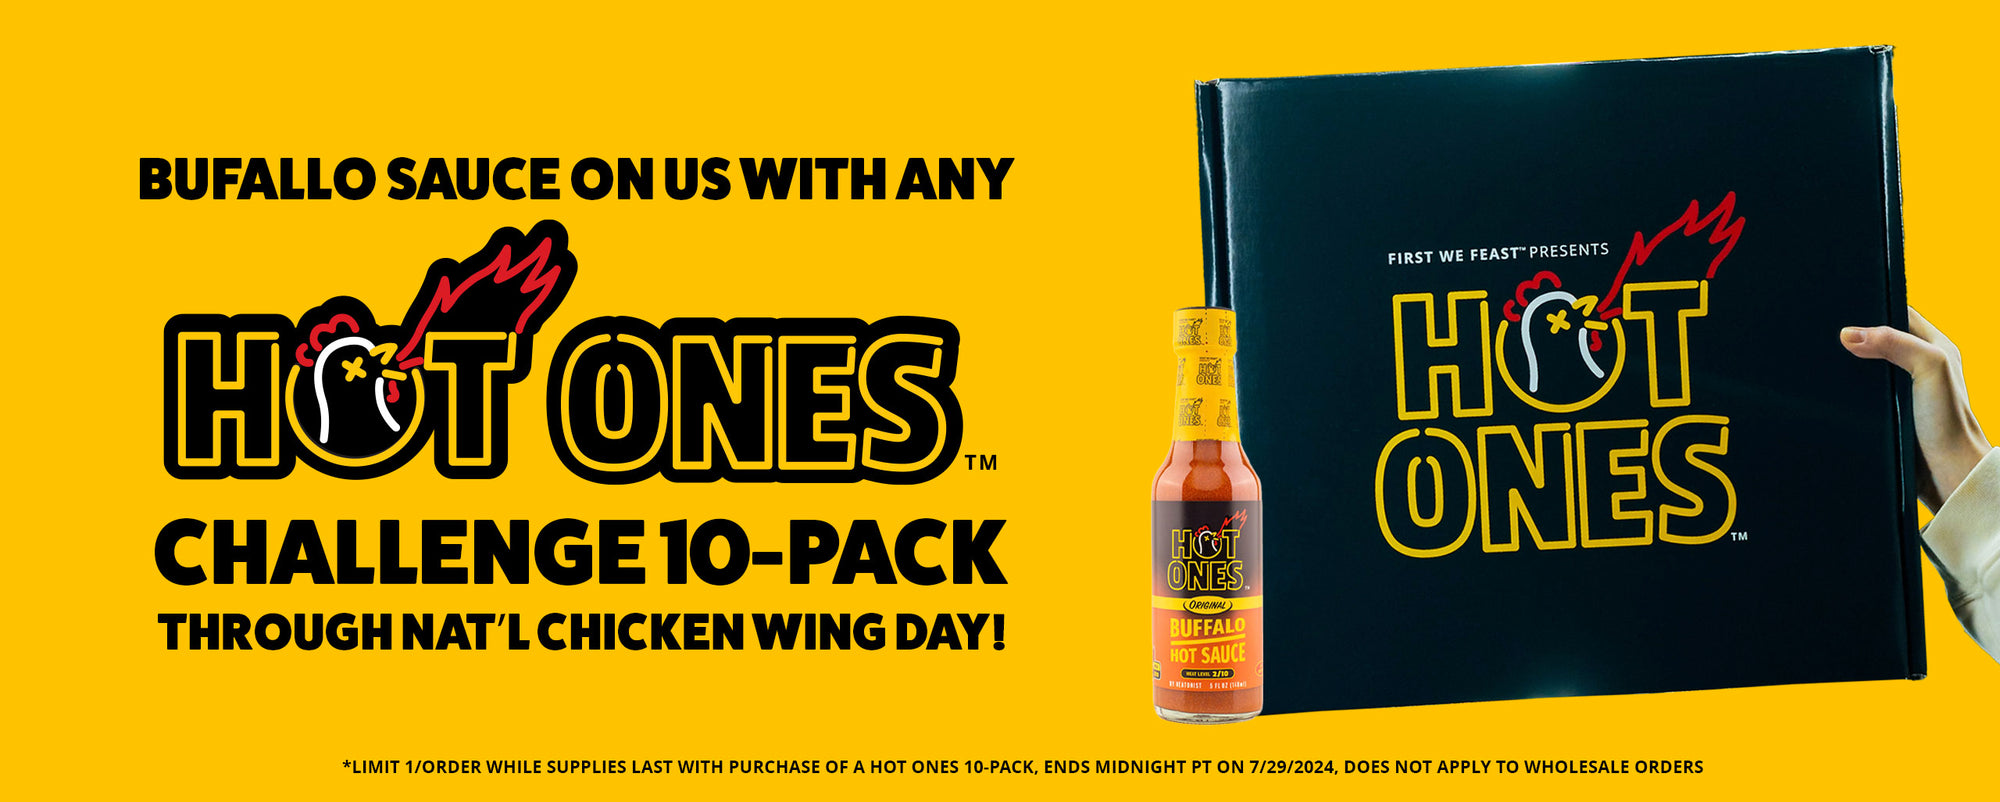 Hot Ones lineup + free Buffalo sauce for Nat'l Chicken Wing Day